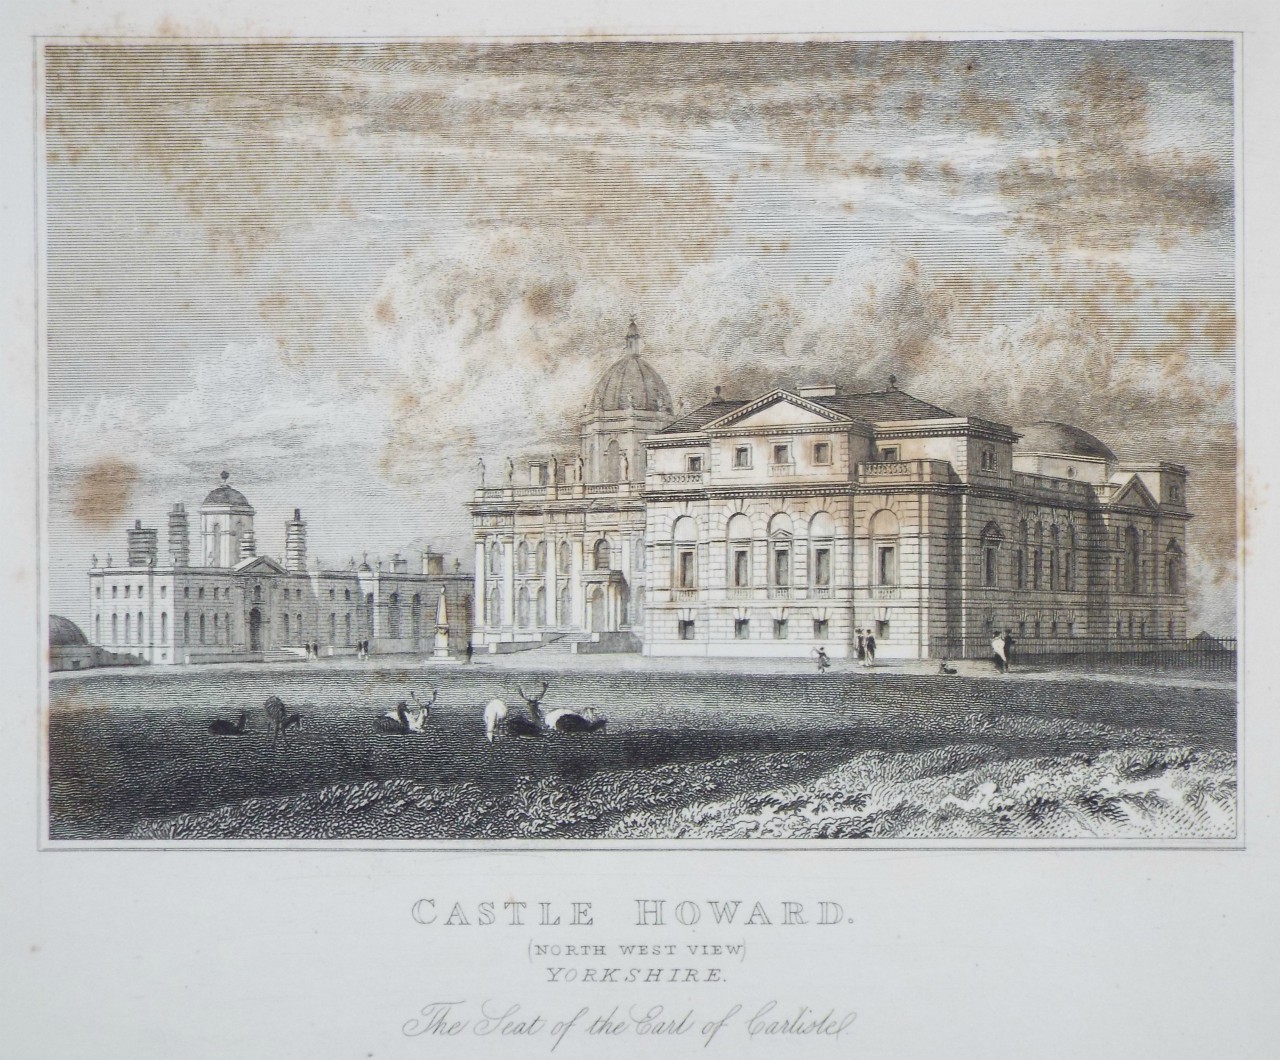 Print - Castle Howard. (North West View) Yorkshire. The Seat of the Earl of Carlisle. - Rawle